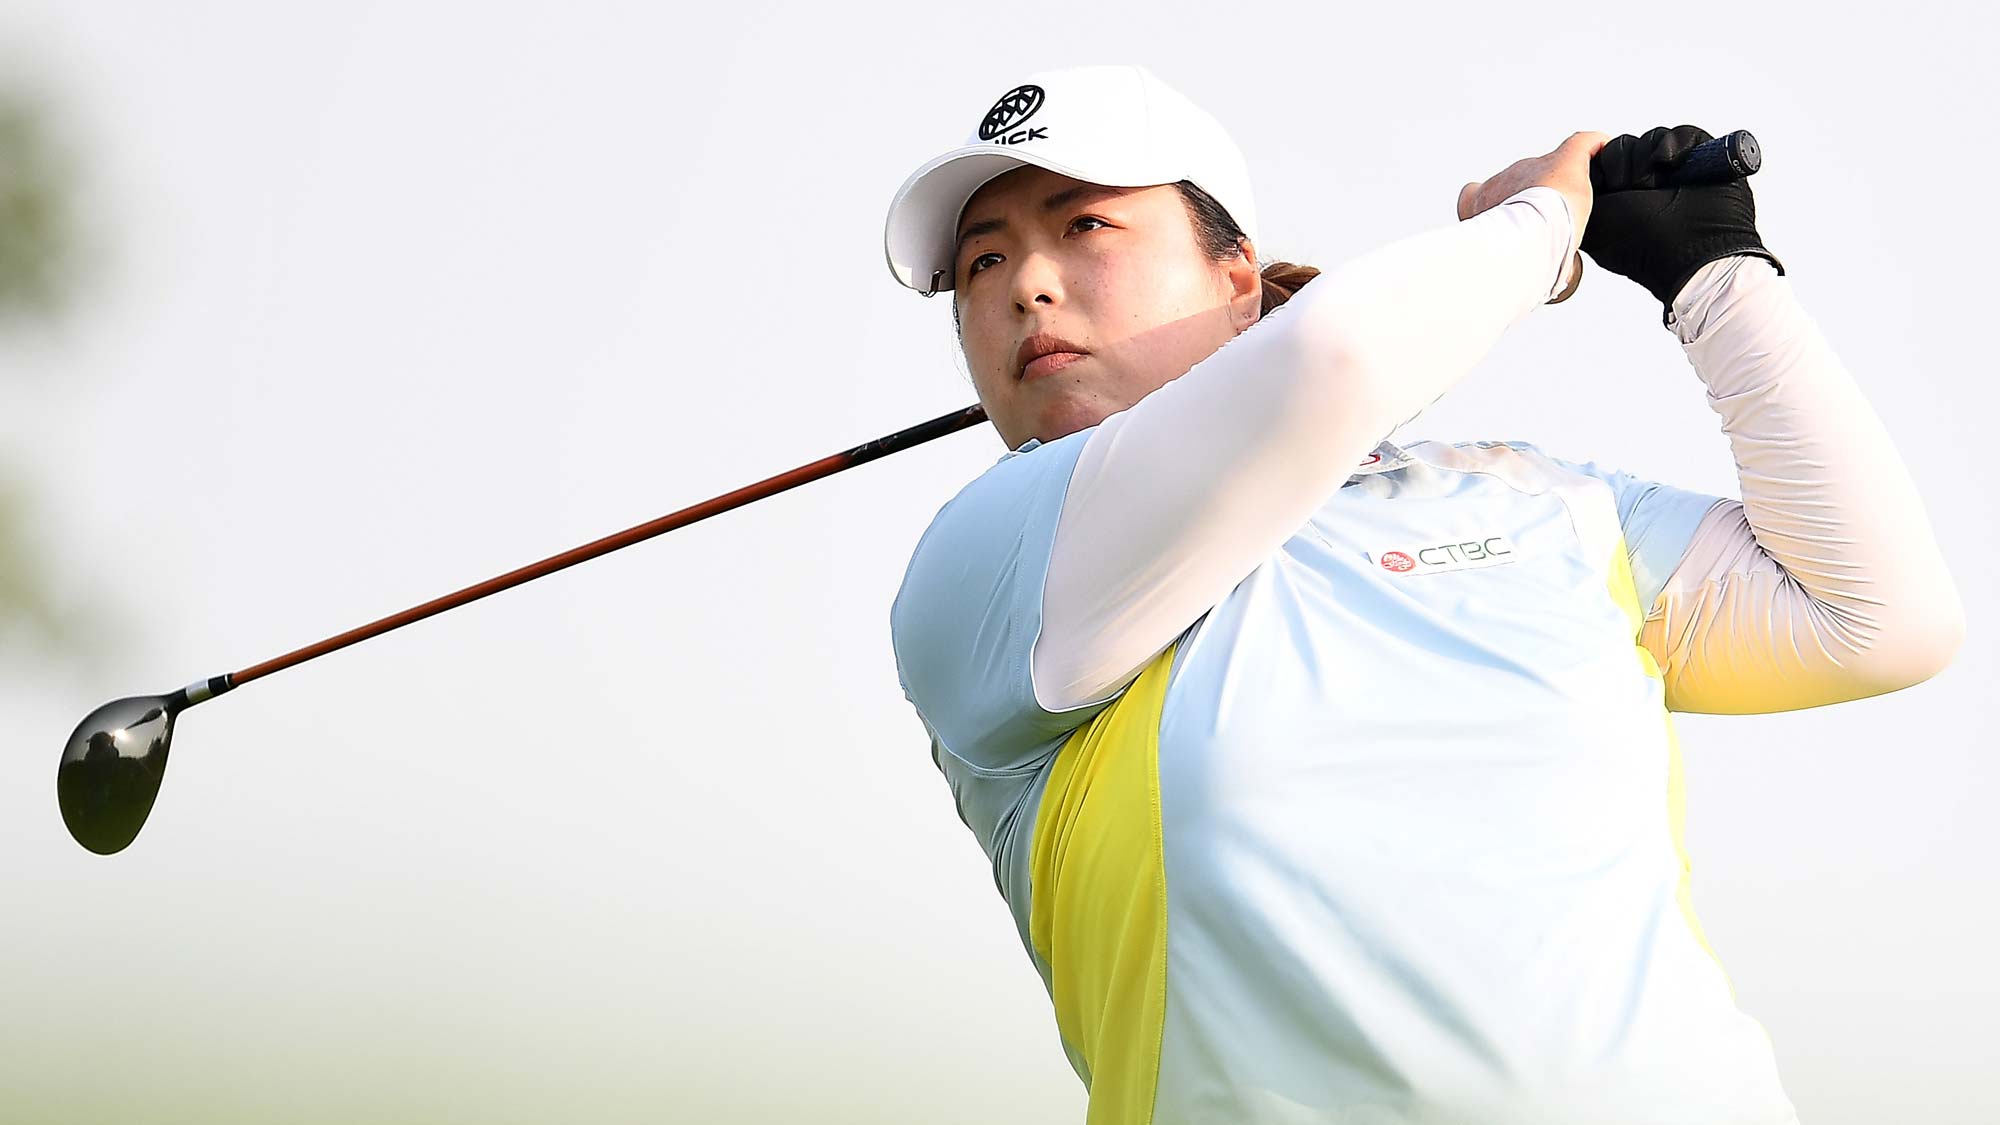 Shanshan Feng of China hits her tee shot on the 16th hole during the final round of the Thornberry Creek LPGA Classic